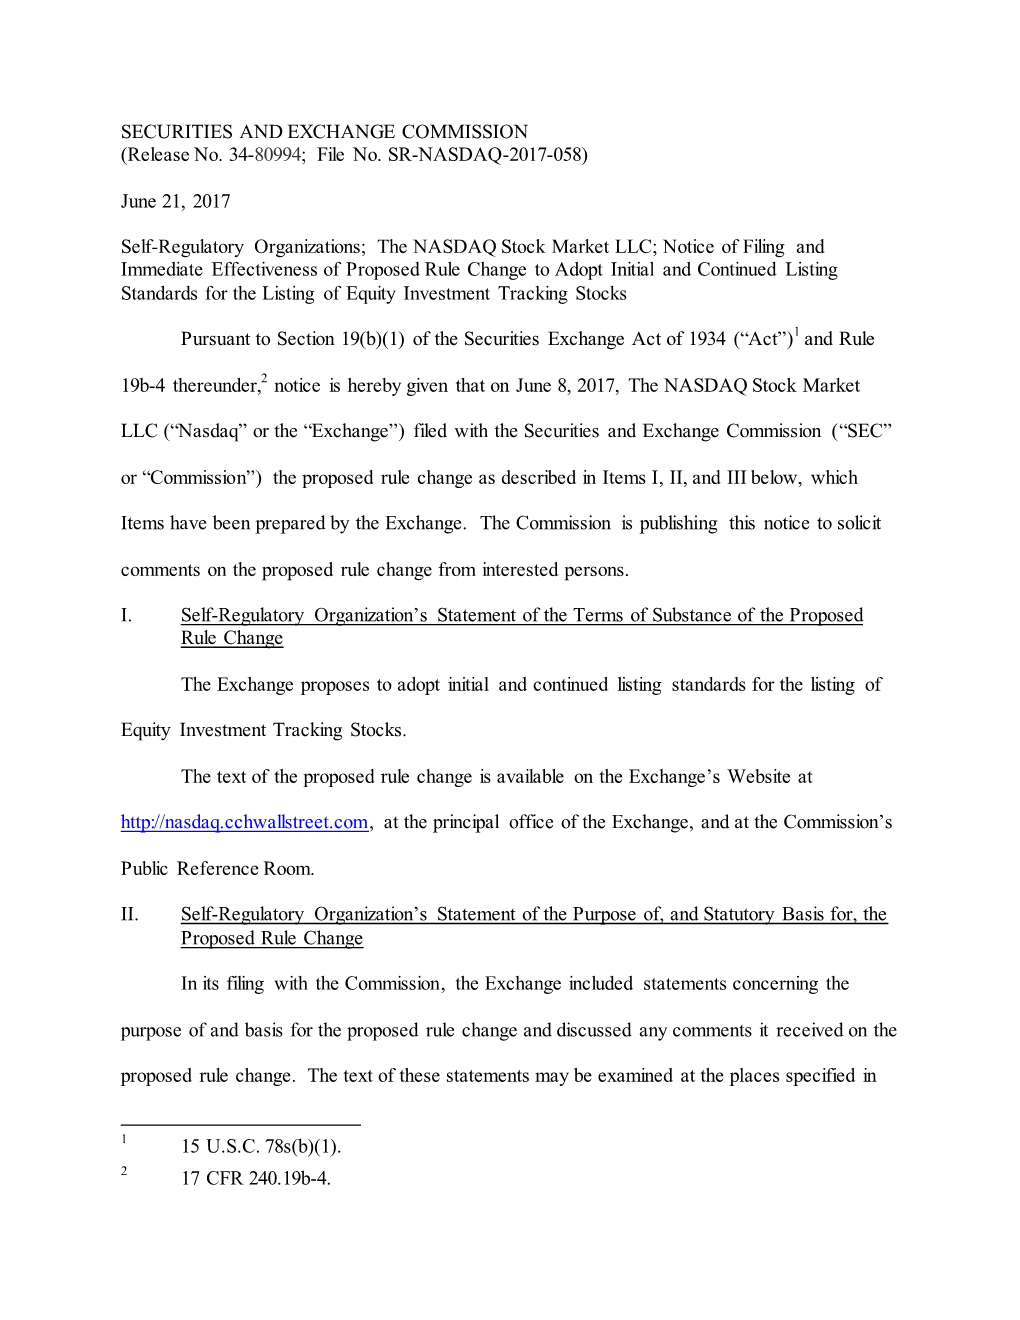 Notice of Filing and Immediate Effectiveness of Proposed Rule